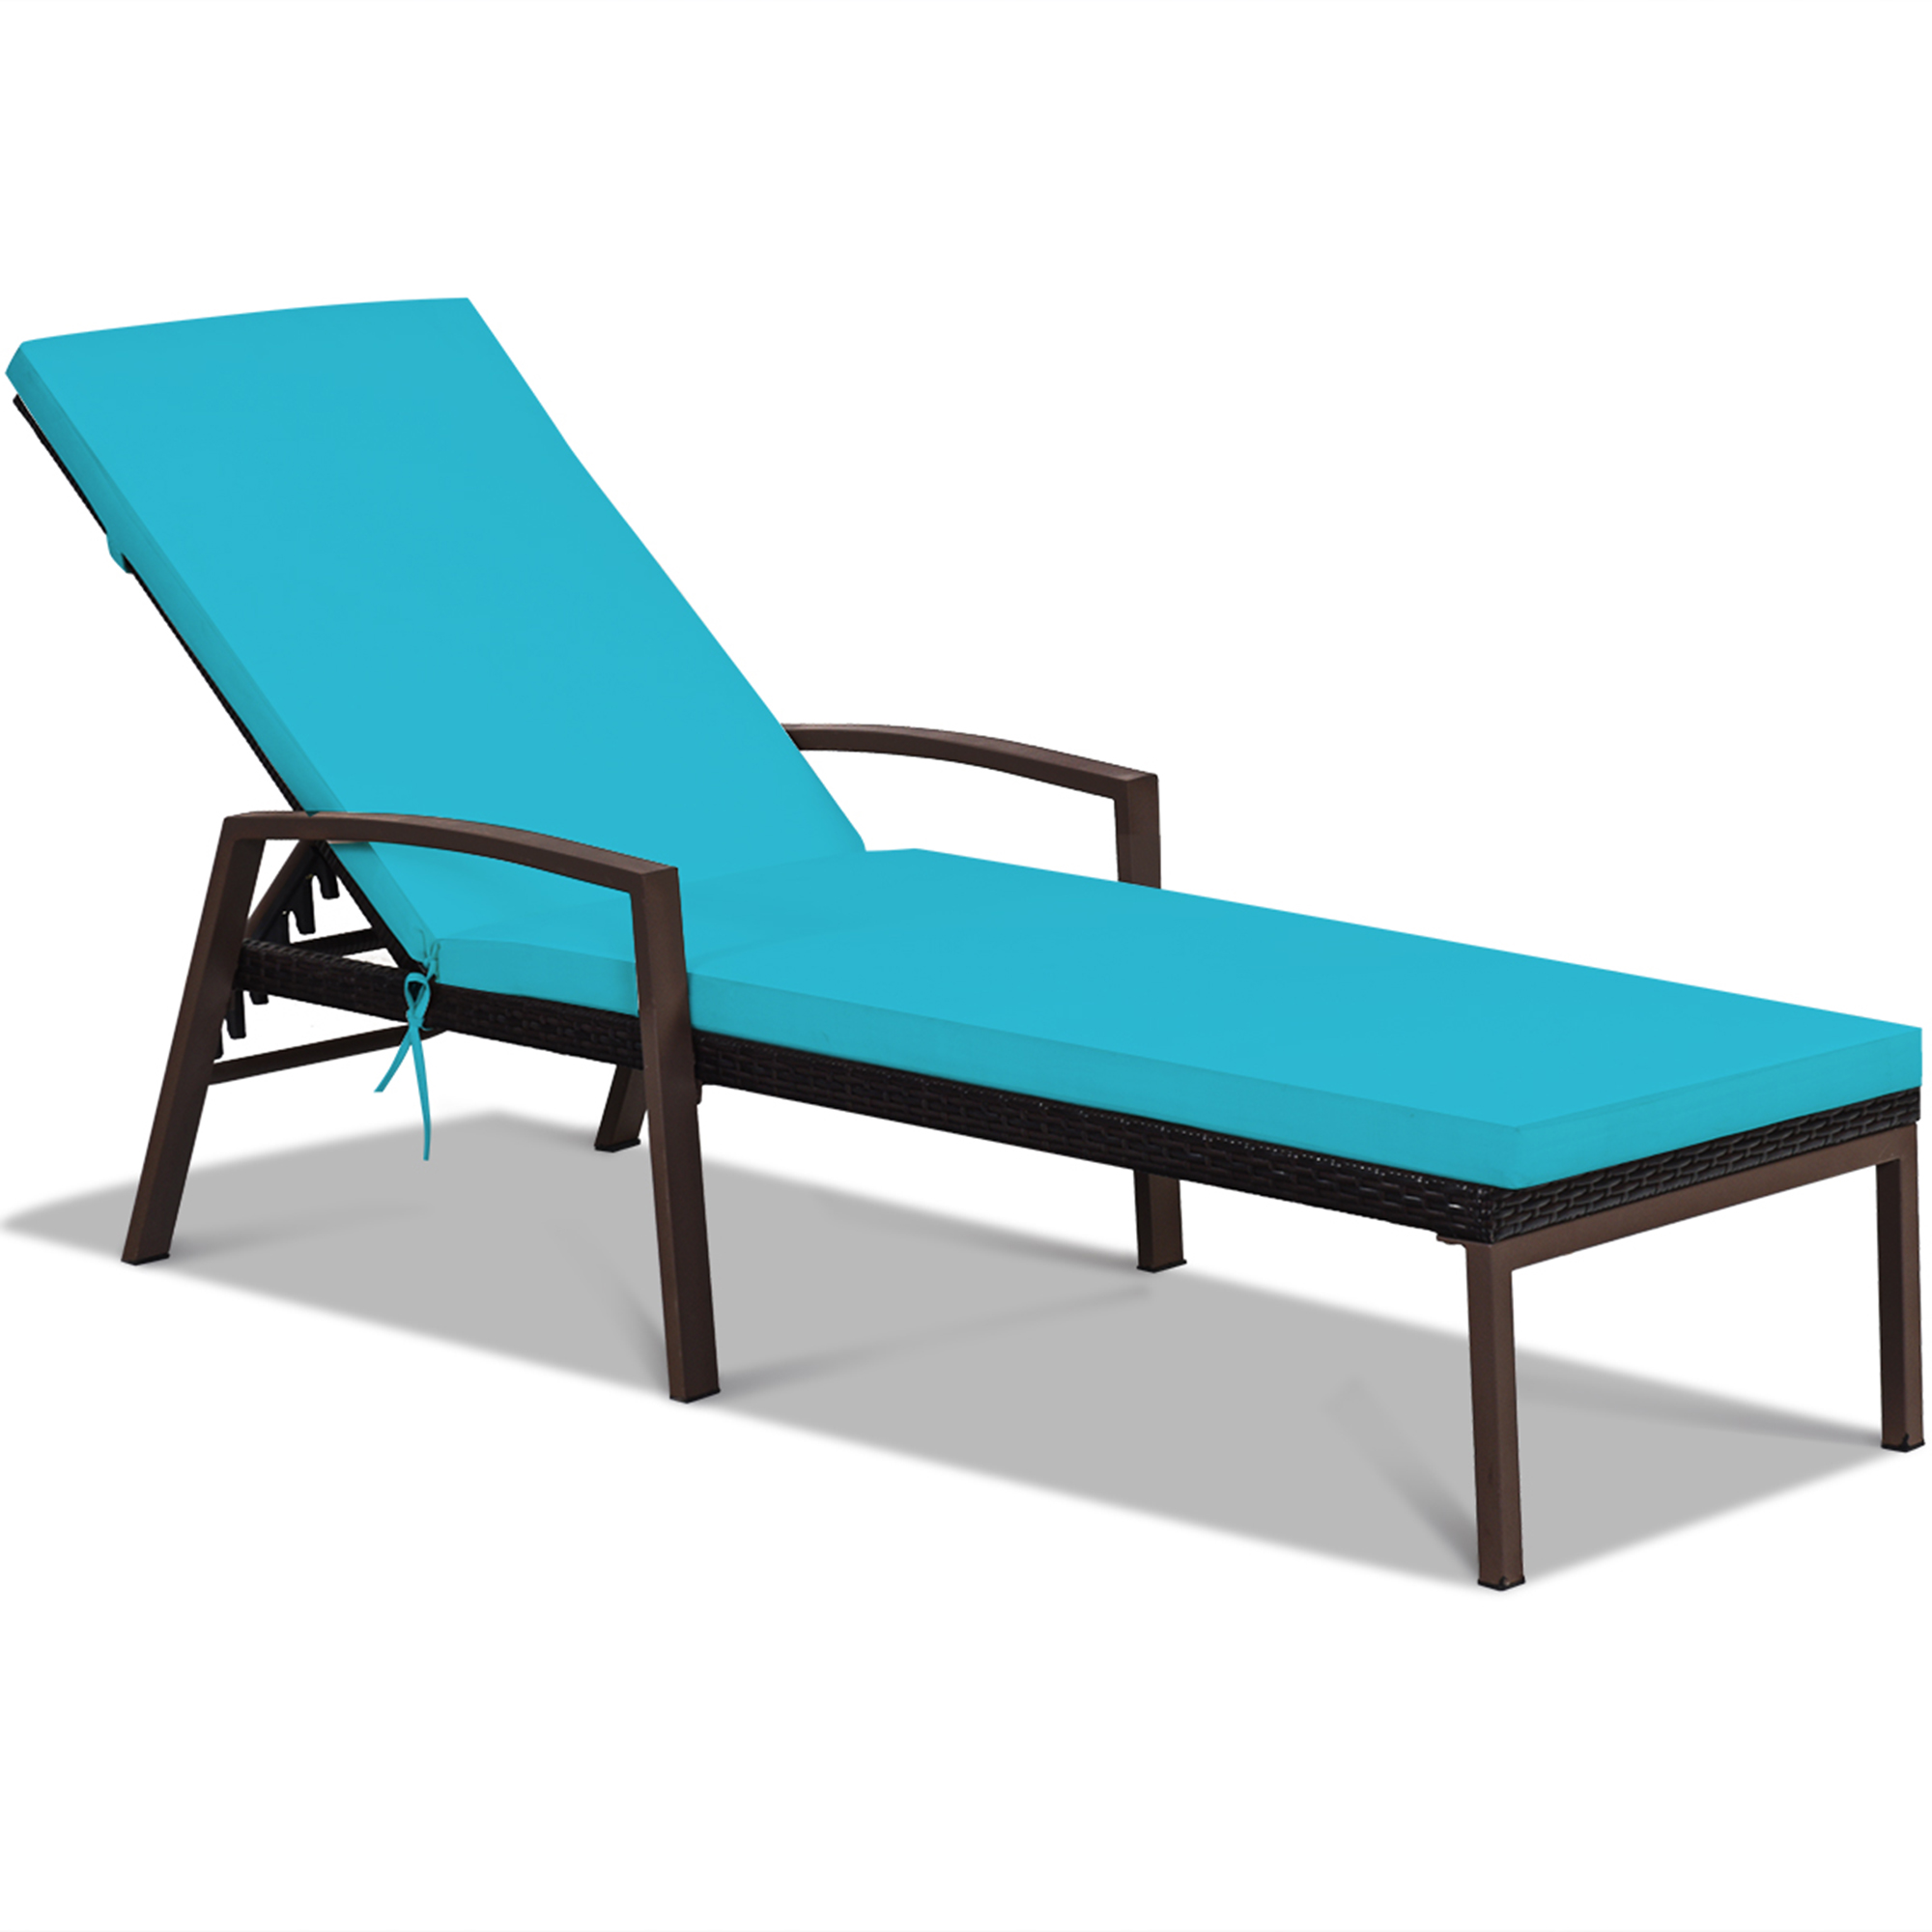 Gymax Adjustable Rattan Chaise Recliner Lounge Chair Patio Outdoor w/ Turquoise Cushion - image 1 of 5